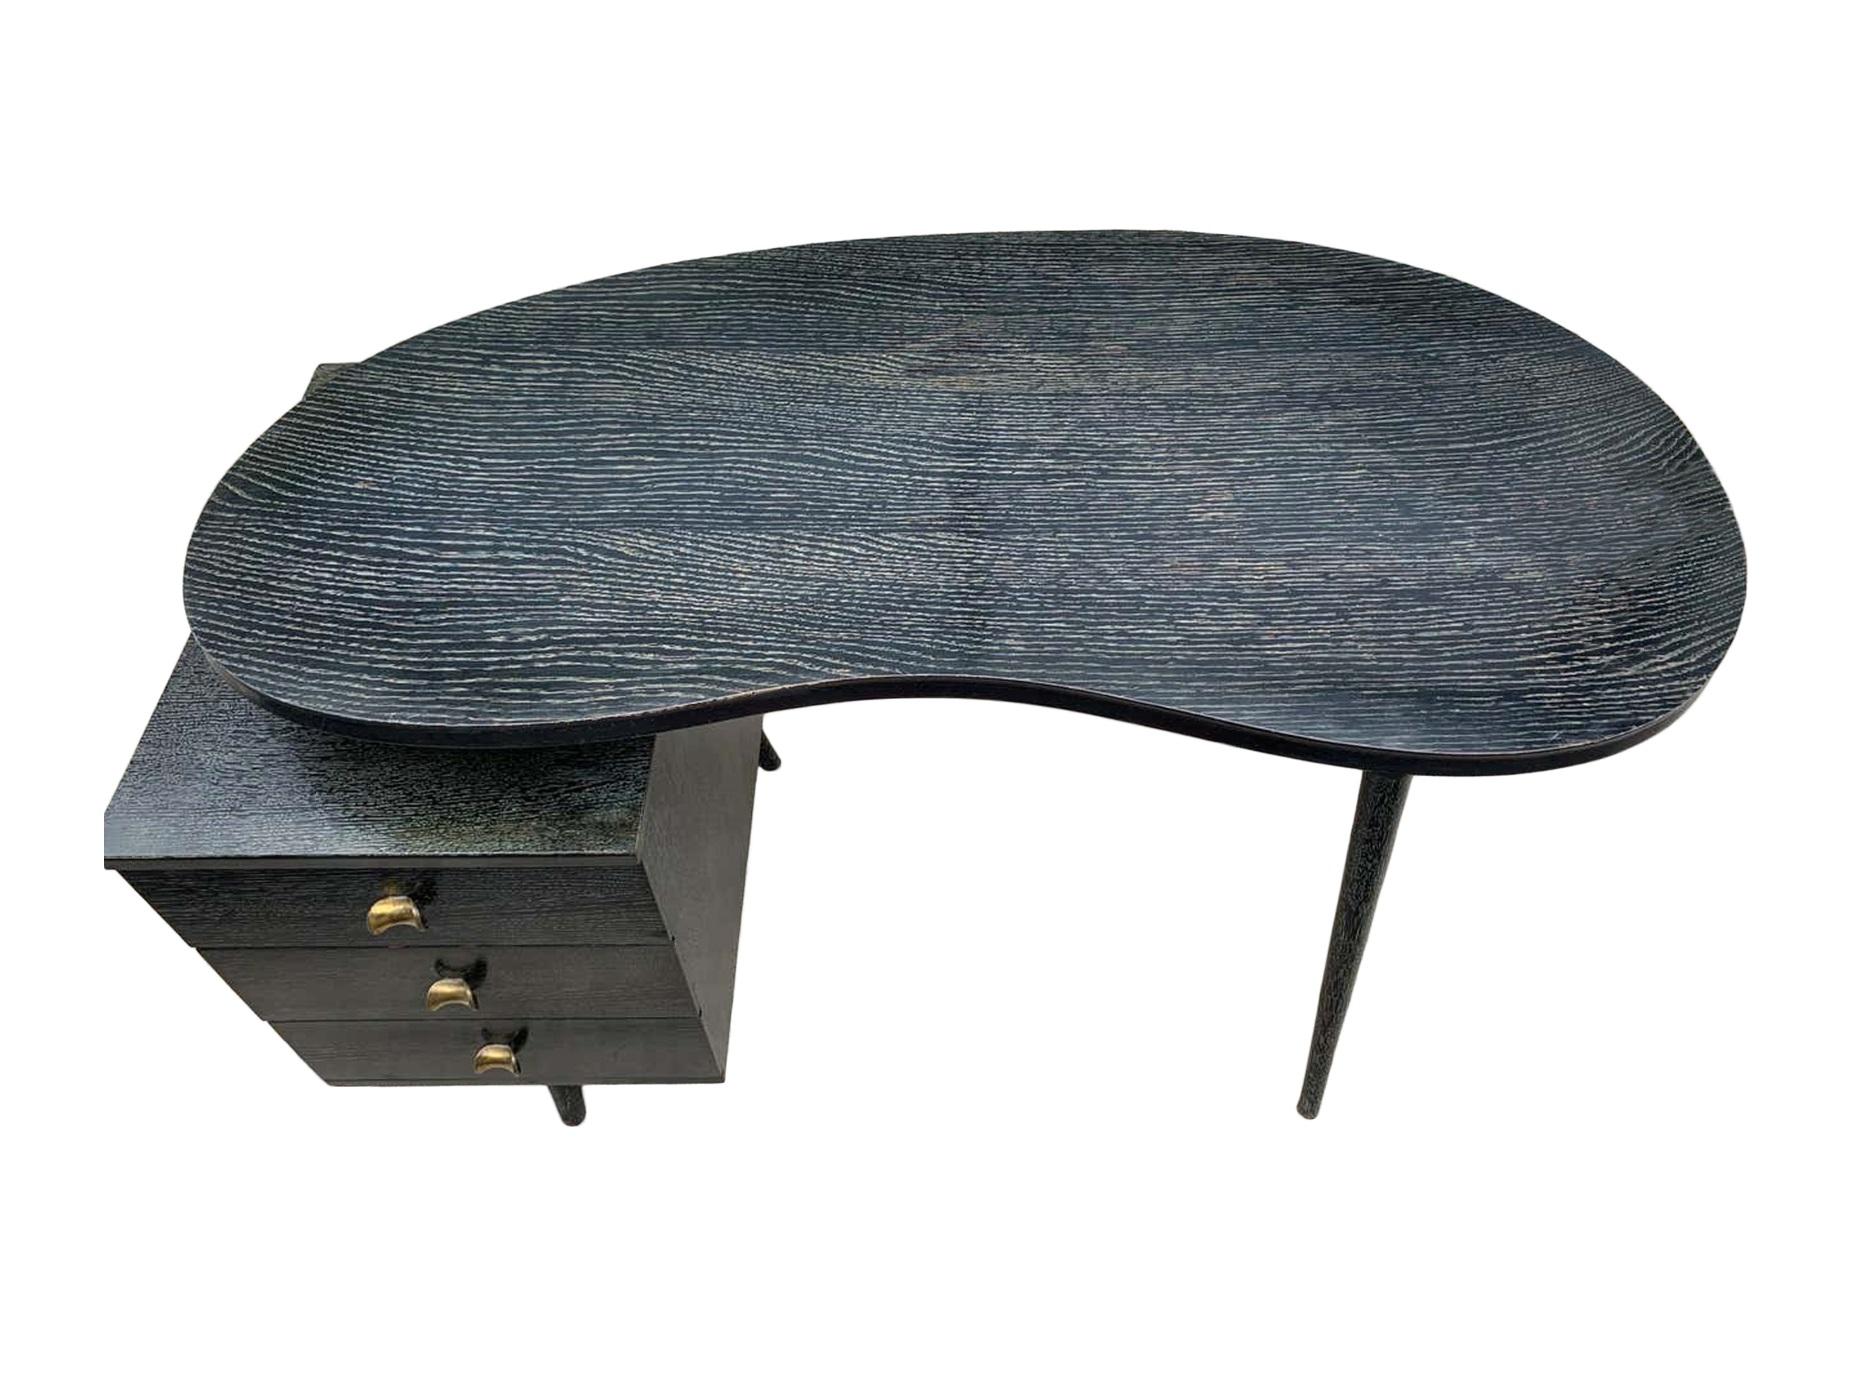 American 1940's Kidney Shaped Cerused Desk by Gilbert Rohde